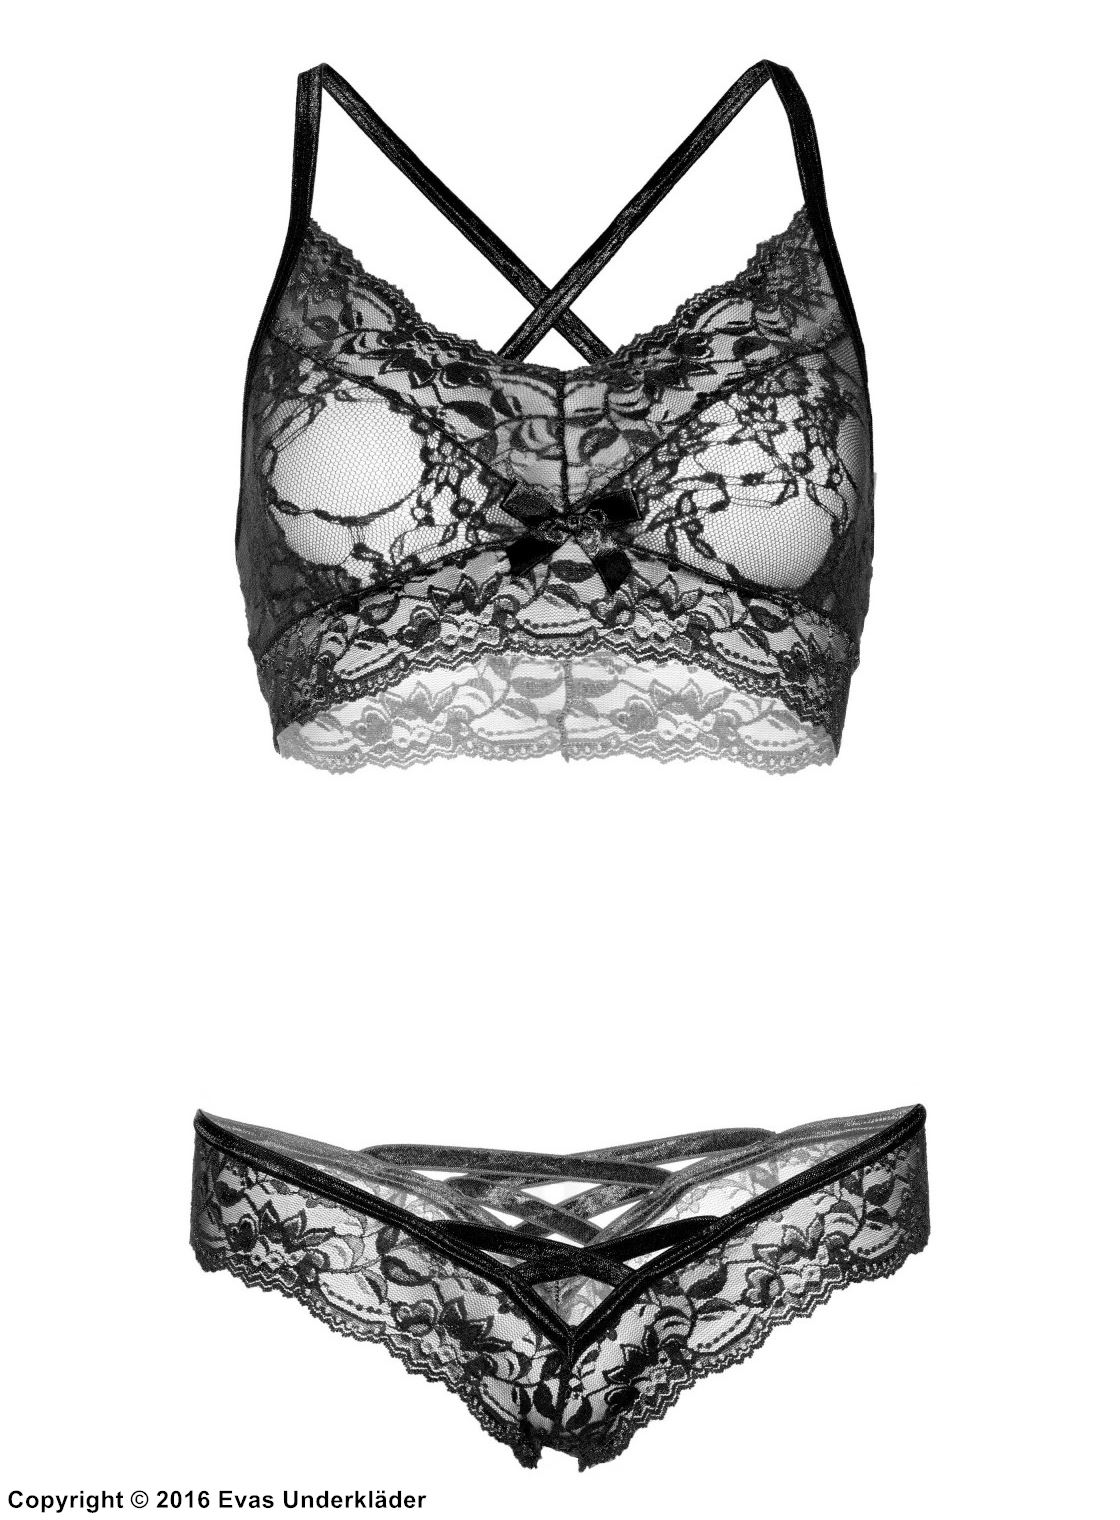 Lace halter bralette and thong